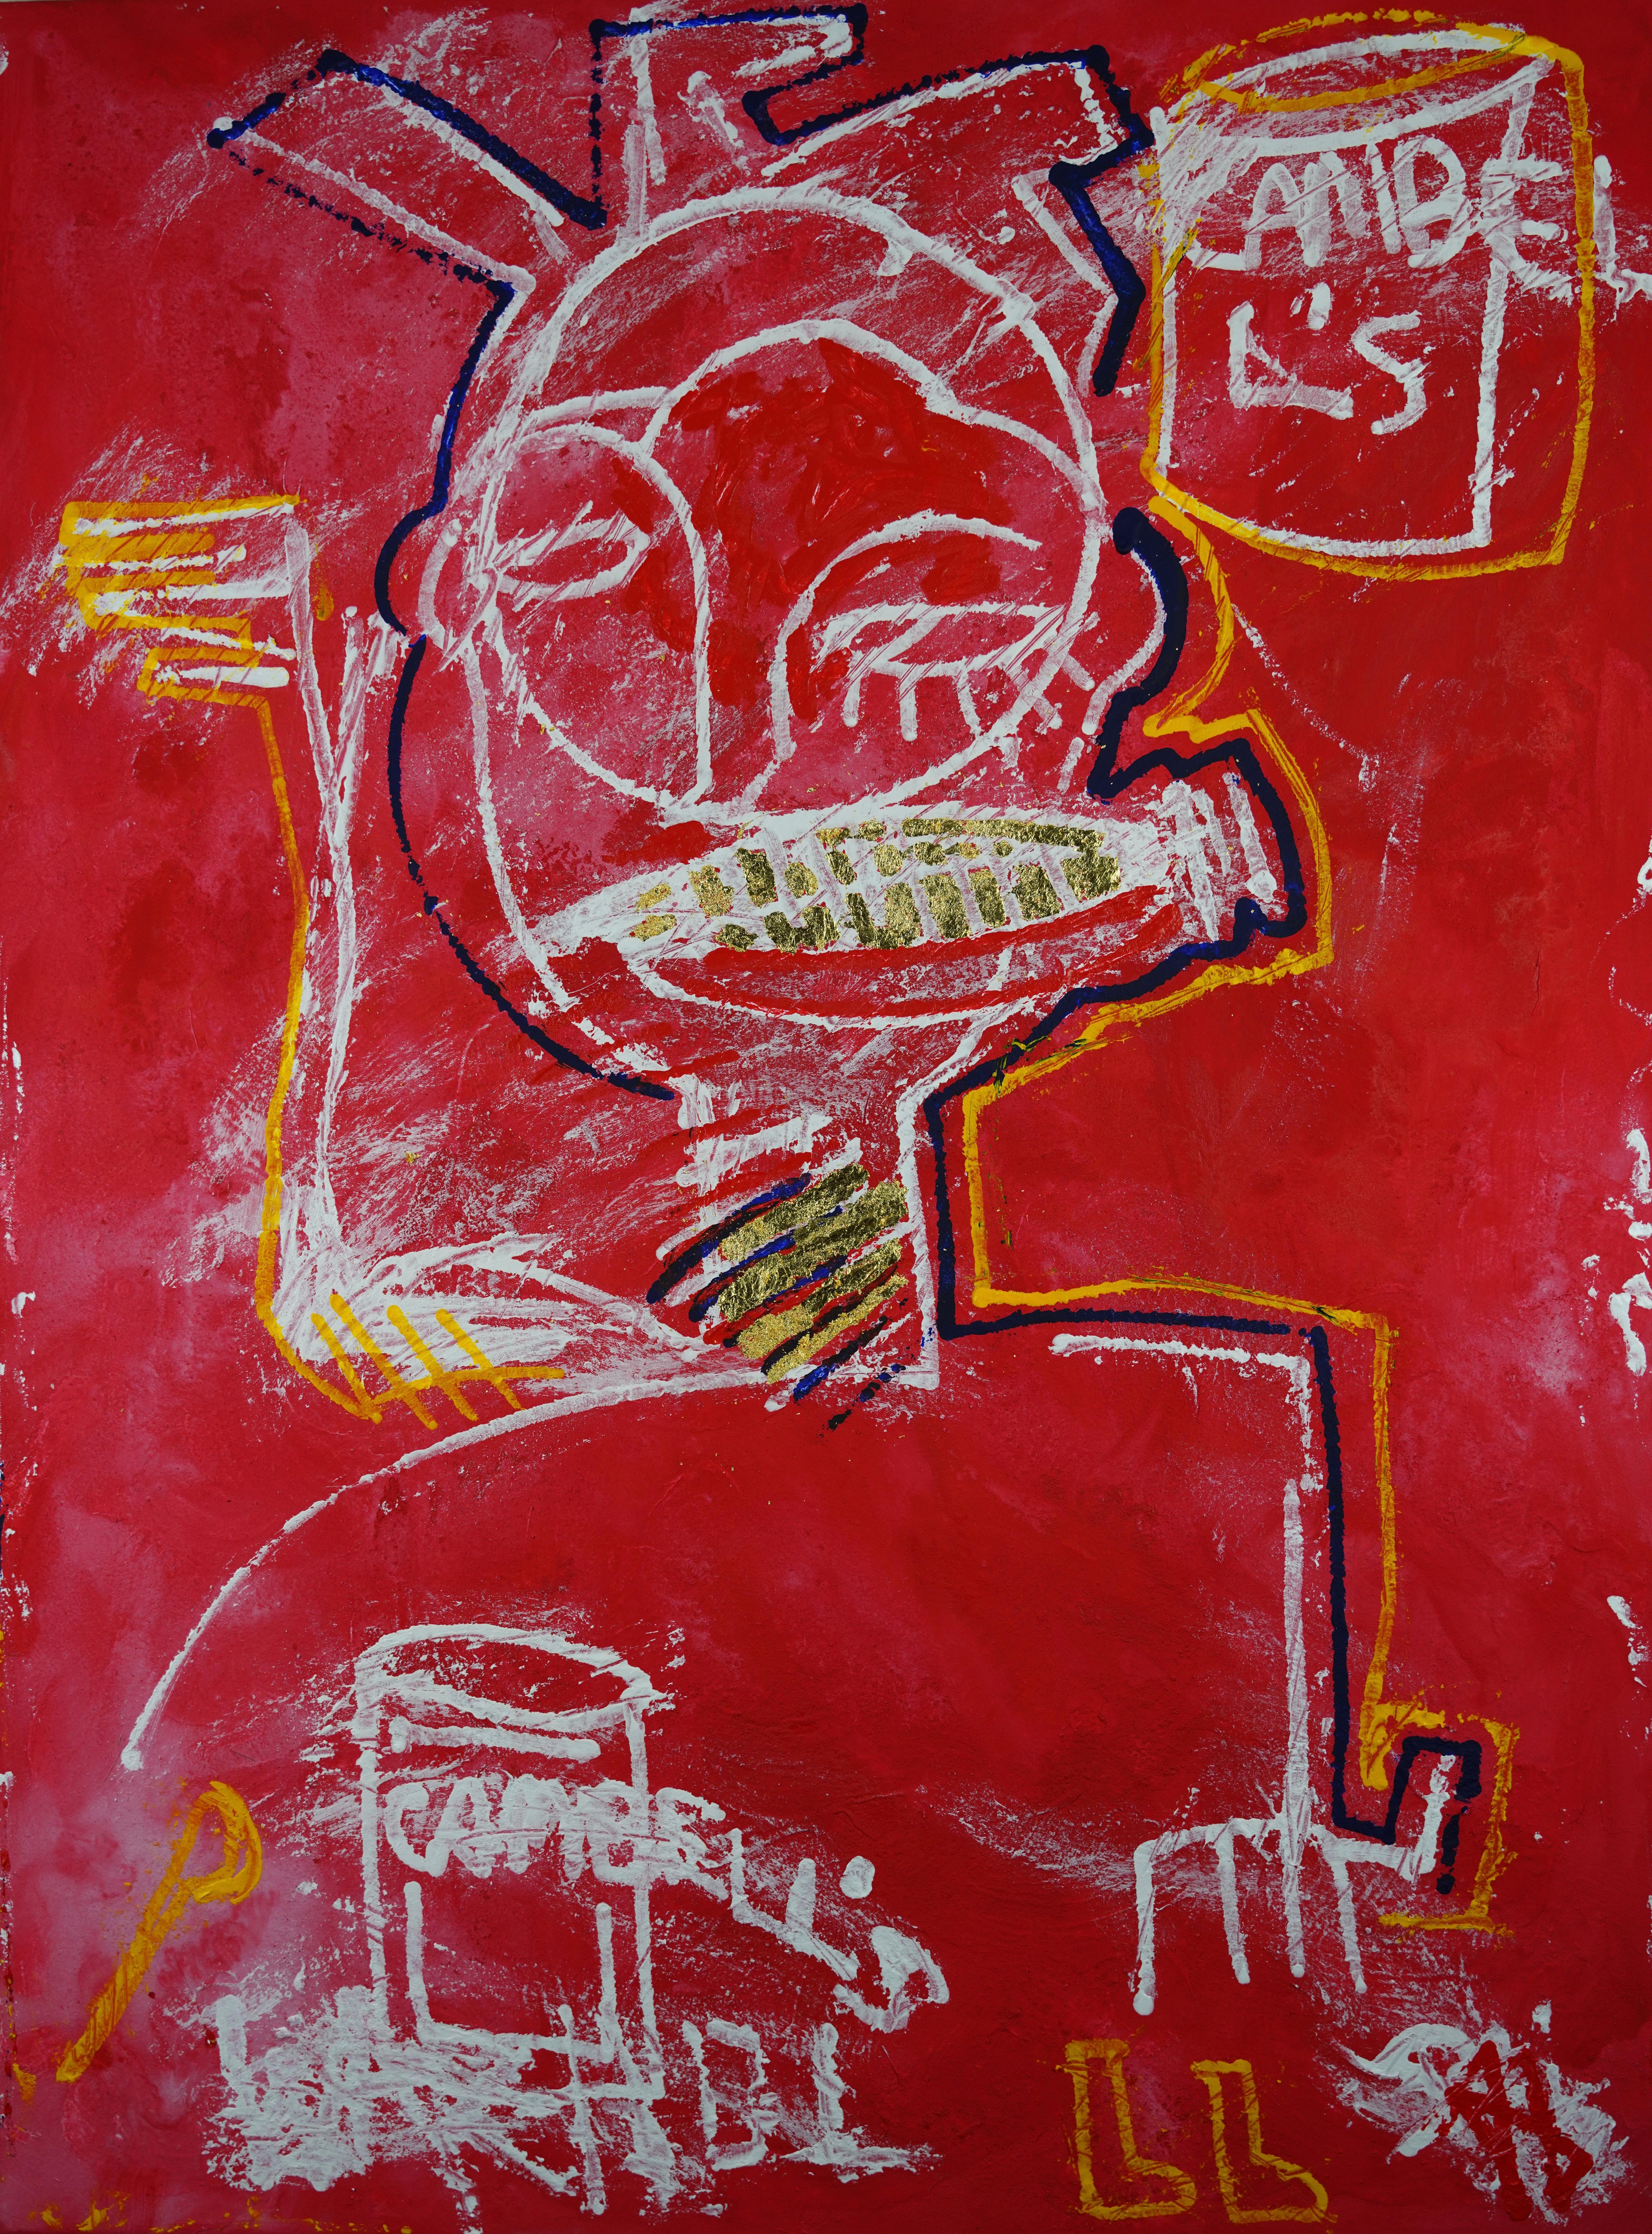 Sax Berlin Abstract Painting - Cambell's Warhol Soup.  Large Neo Expressionist Oil Painting